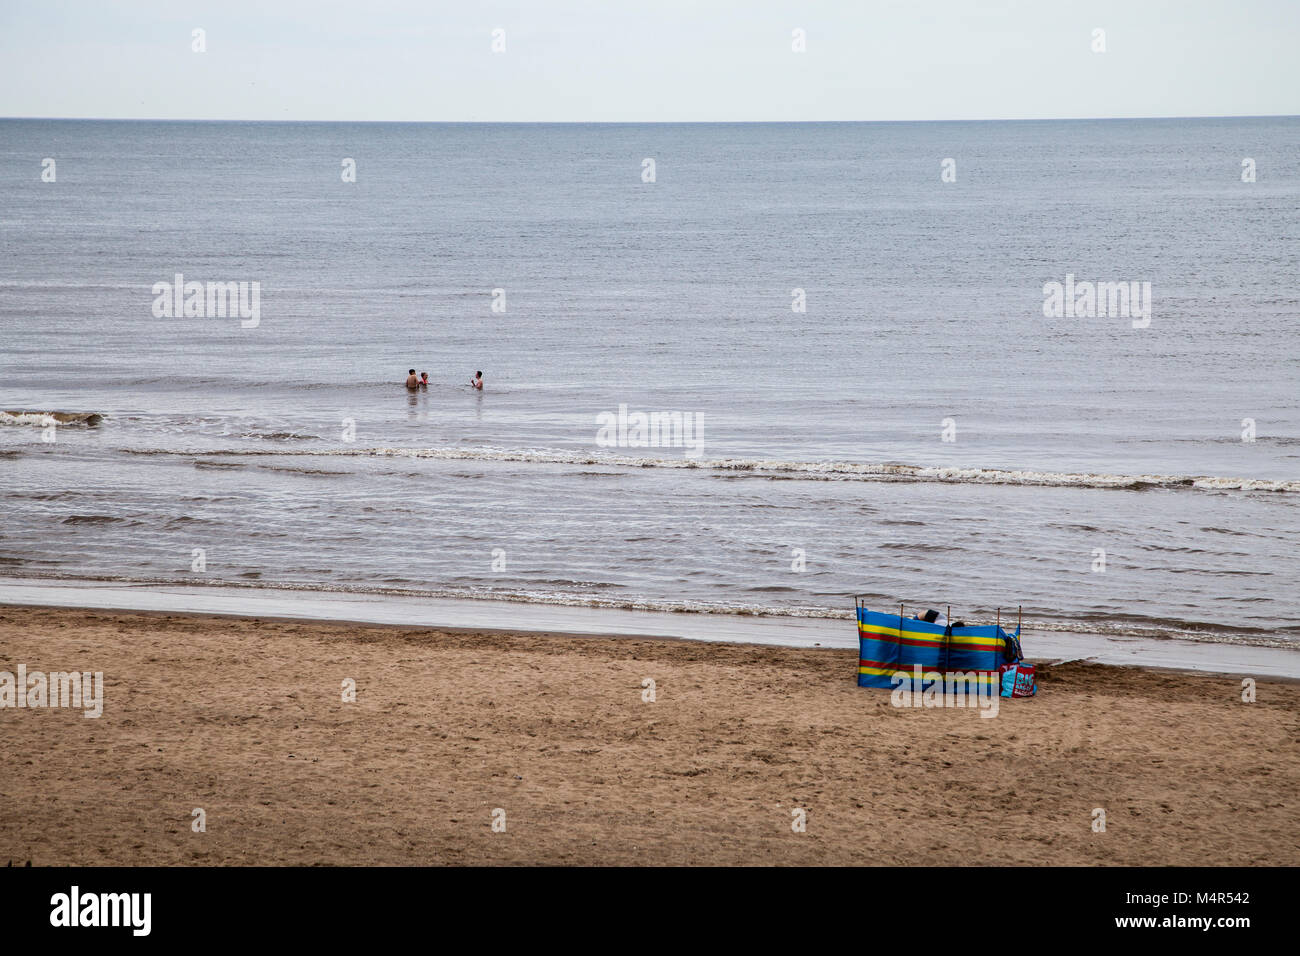 wind breaker on beach at Mablethorpe, Lincolnshire,England Stock Photo